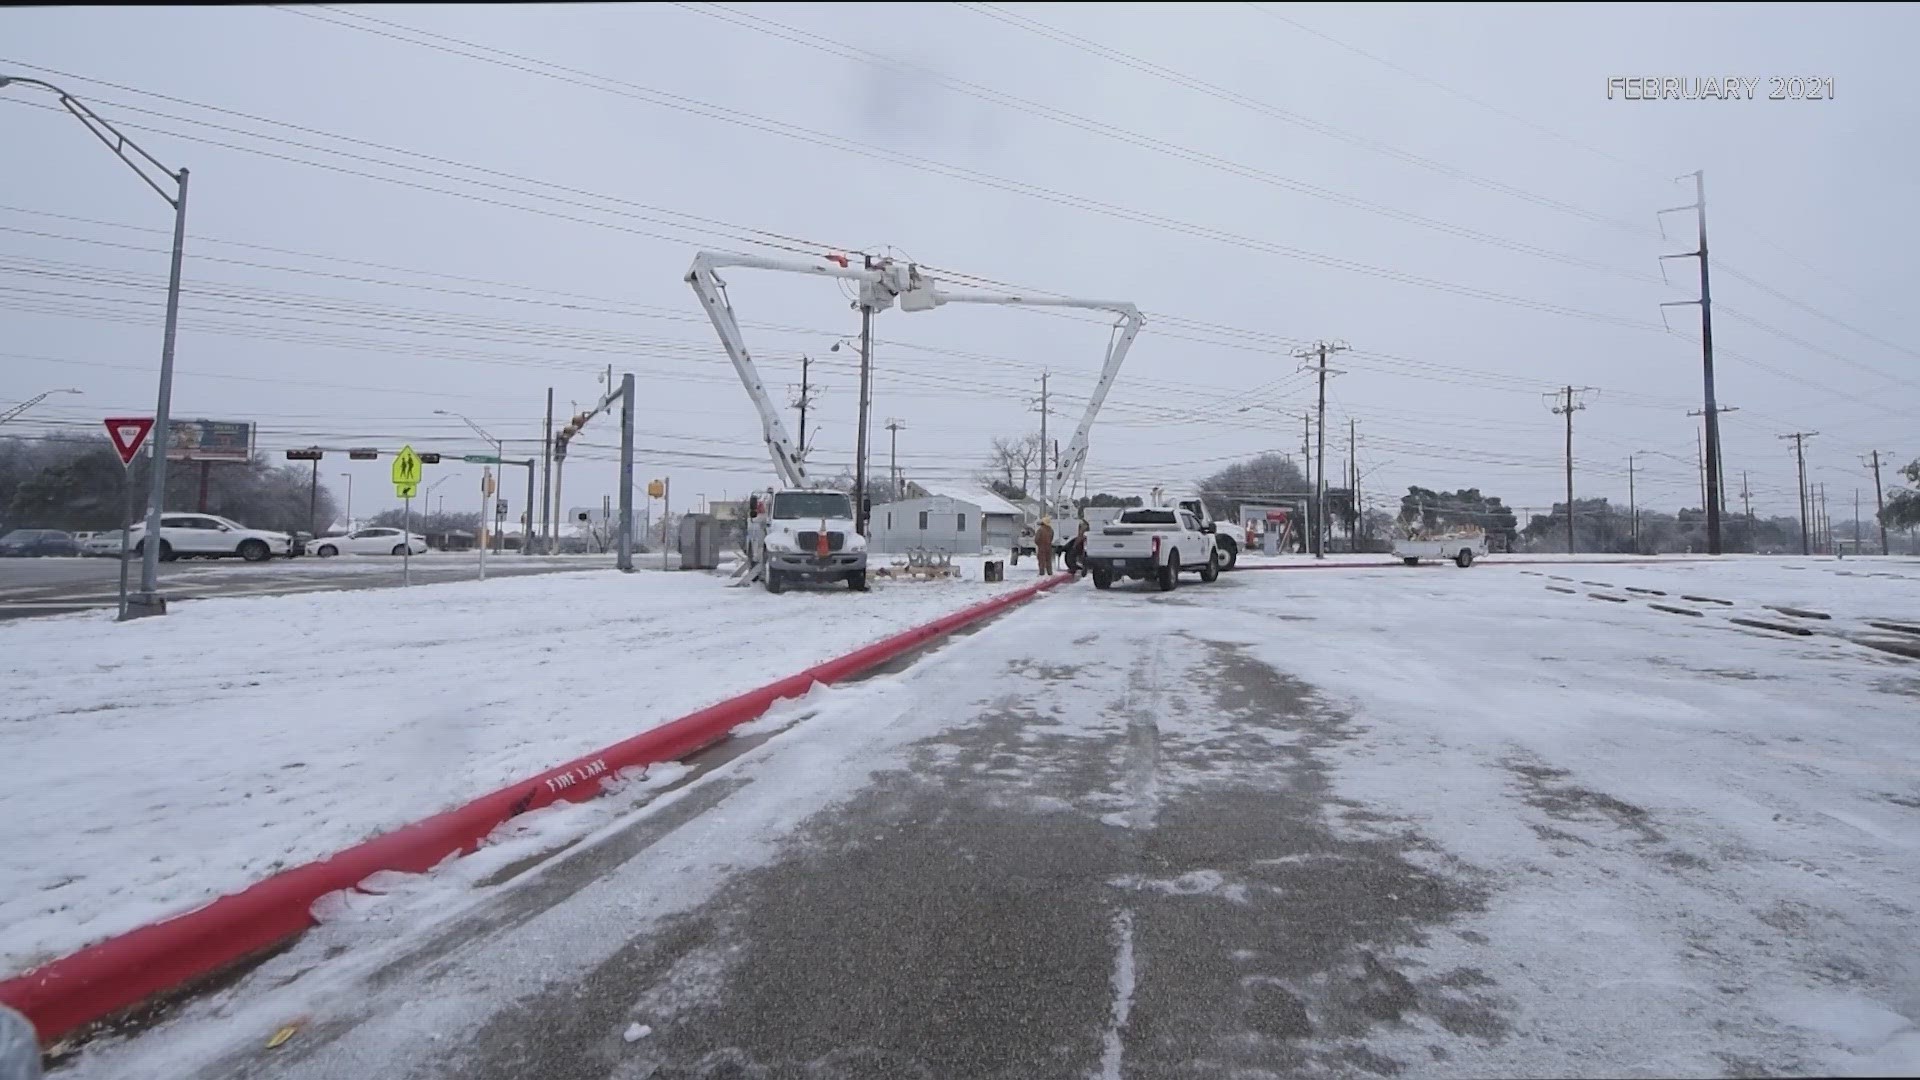 The Texas power grid manager expects enough supply to cover electricity demand during the upcoming freeze, but one expert points to lurking danger.